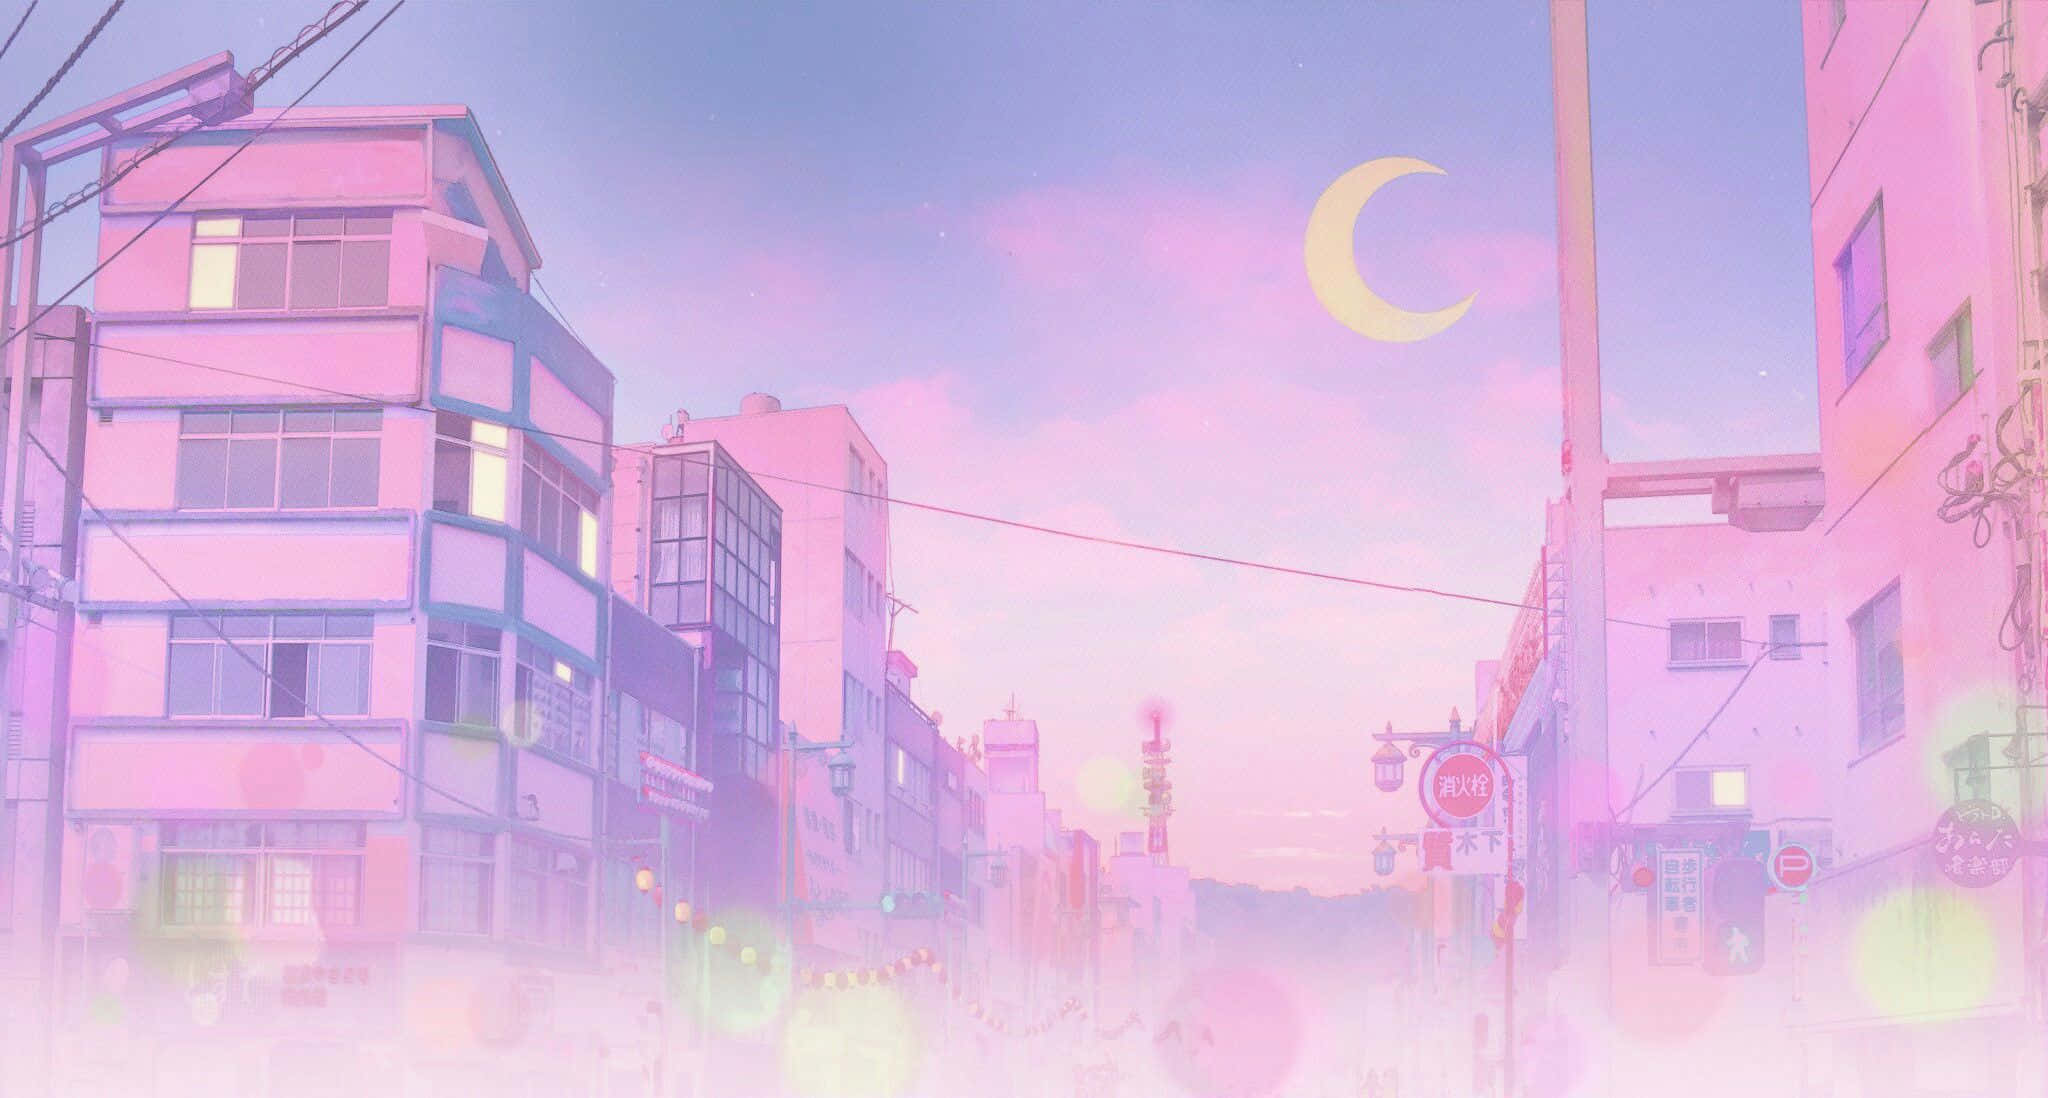 Haru in her Pink Anime Aesthetic